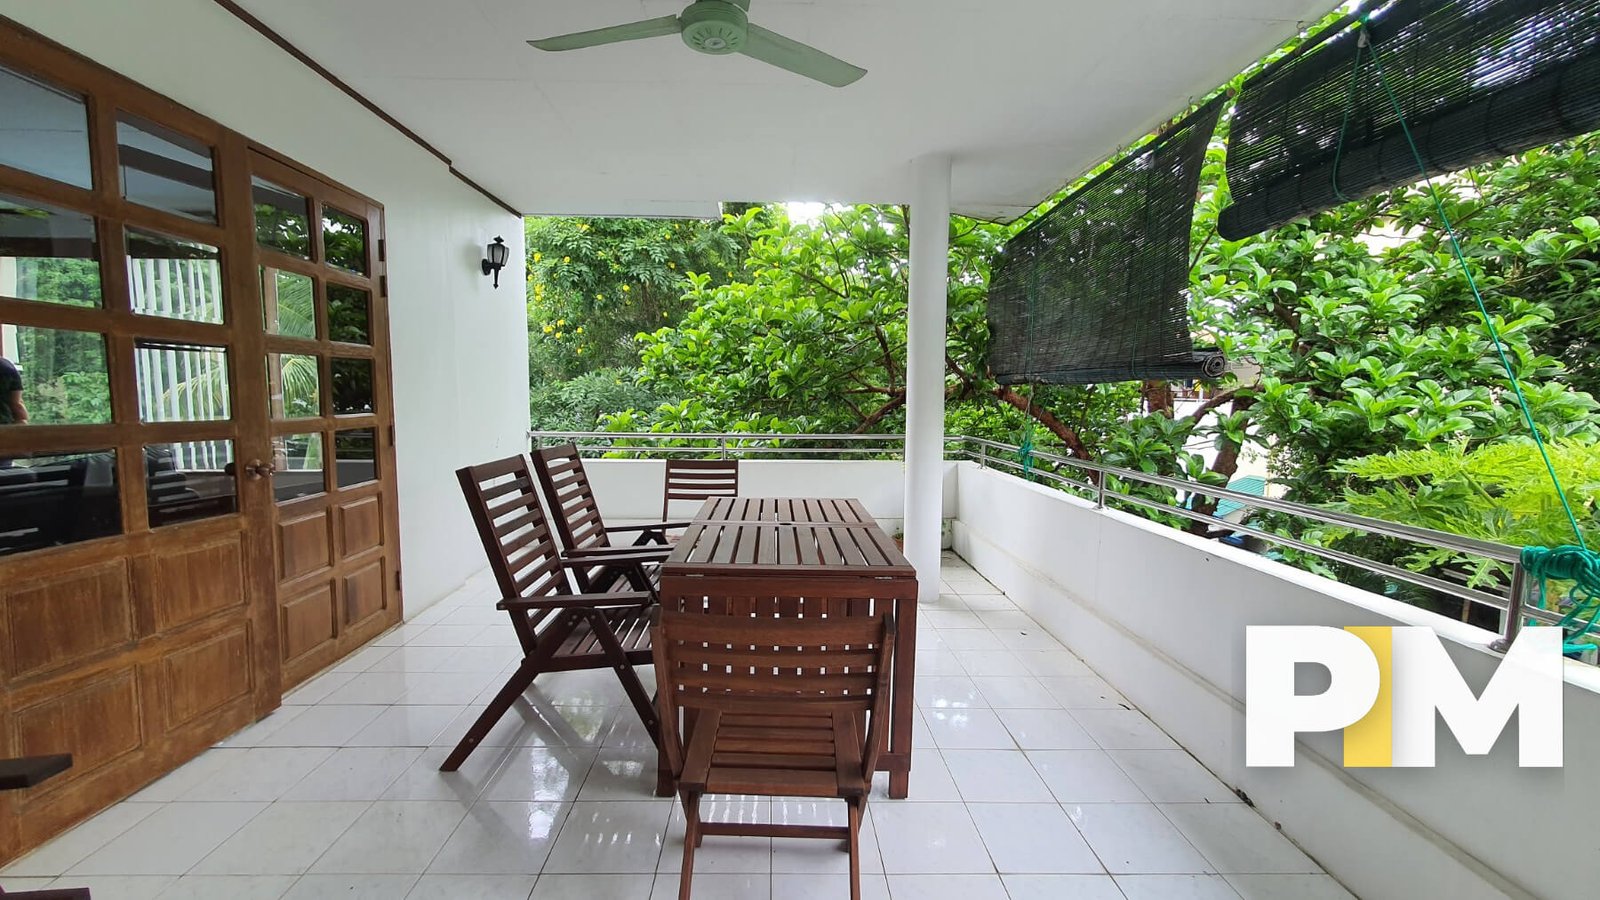 Balcony with table and chairs - Yangon Real Estate